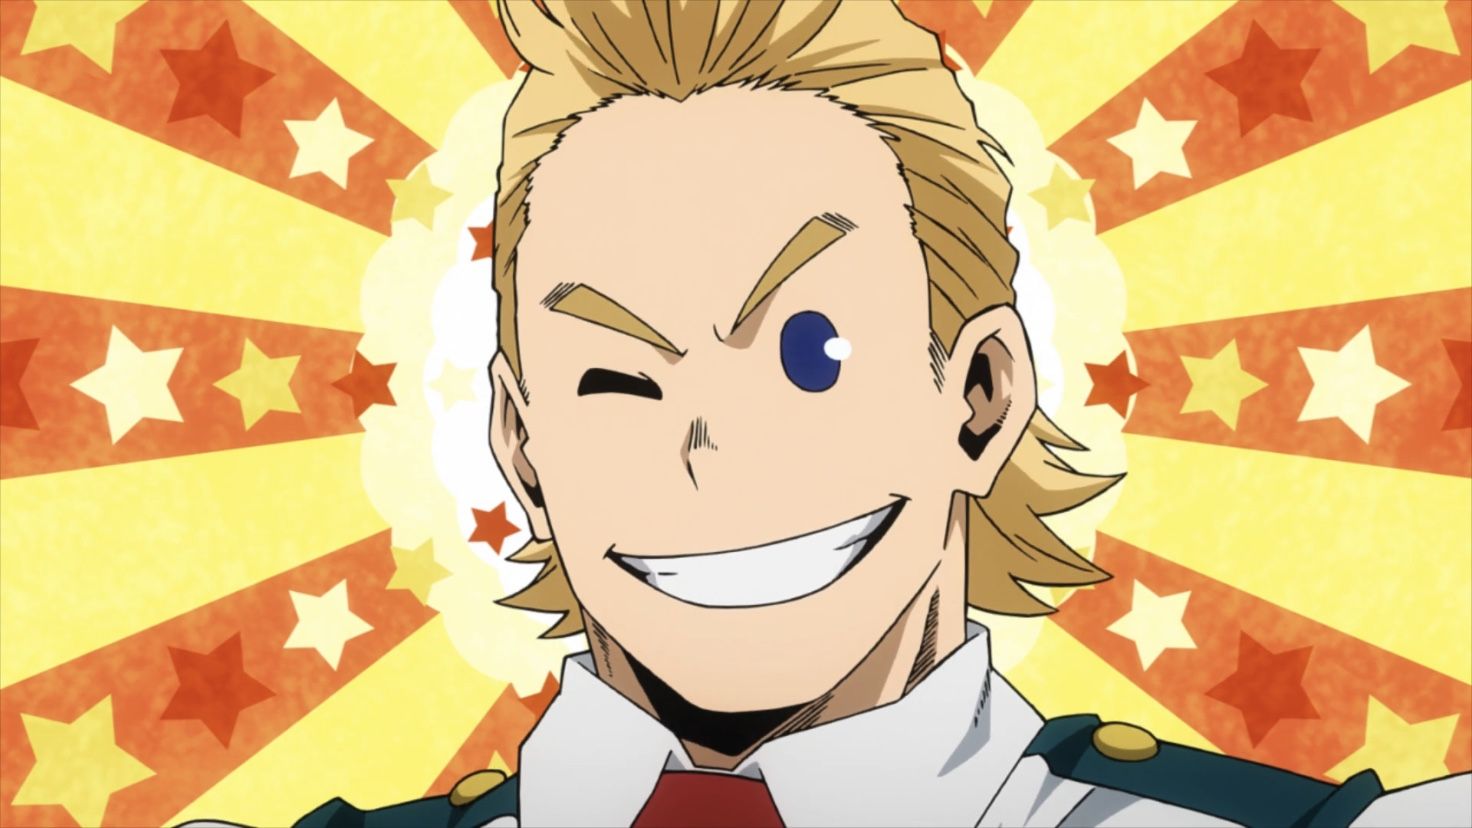 Mirio Togata from My Hero Academia being optimistic about the future as he greets everyone with a kind smile. 